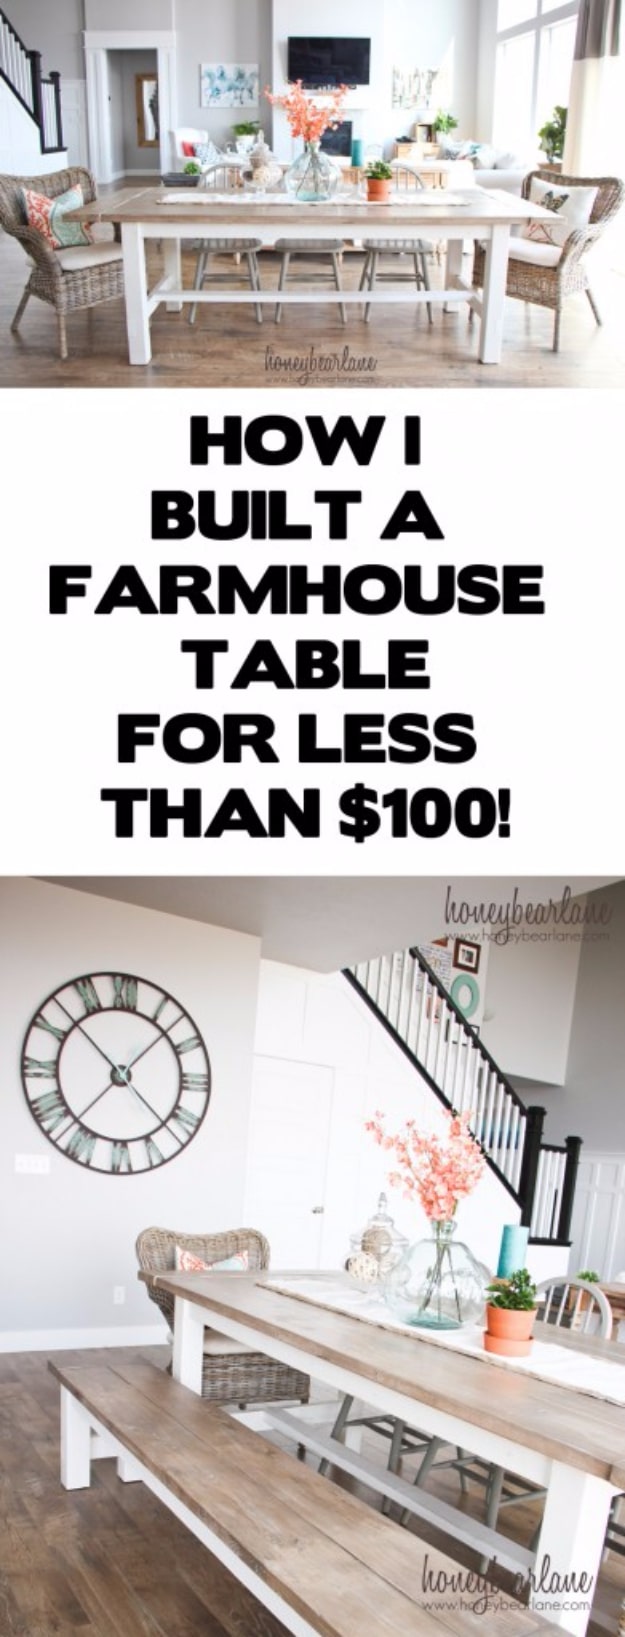 DIY Dining Room Table Projects - DIY Farmhouse Table For $100 - Creative Do It Yourself Tables and Ideas You Can Make For Your Kitchen or Dining Area. Easy Step by Step Tutorials that Are Perfect For Those On A Budget http://diyjoy.com/diy-dining-room-table-projects